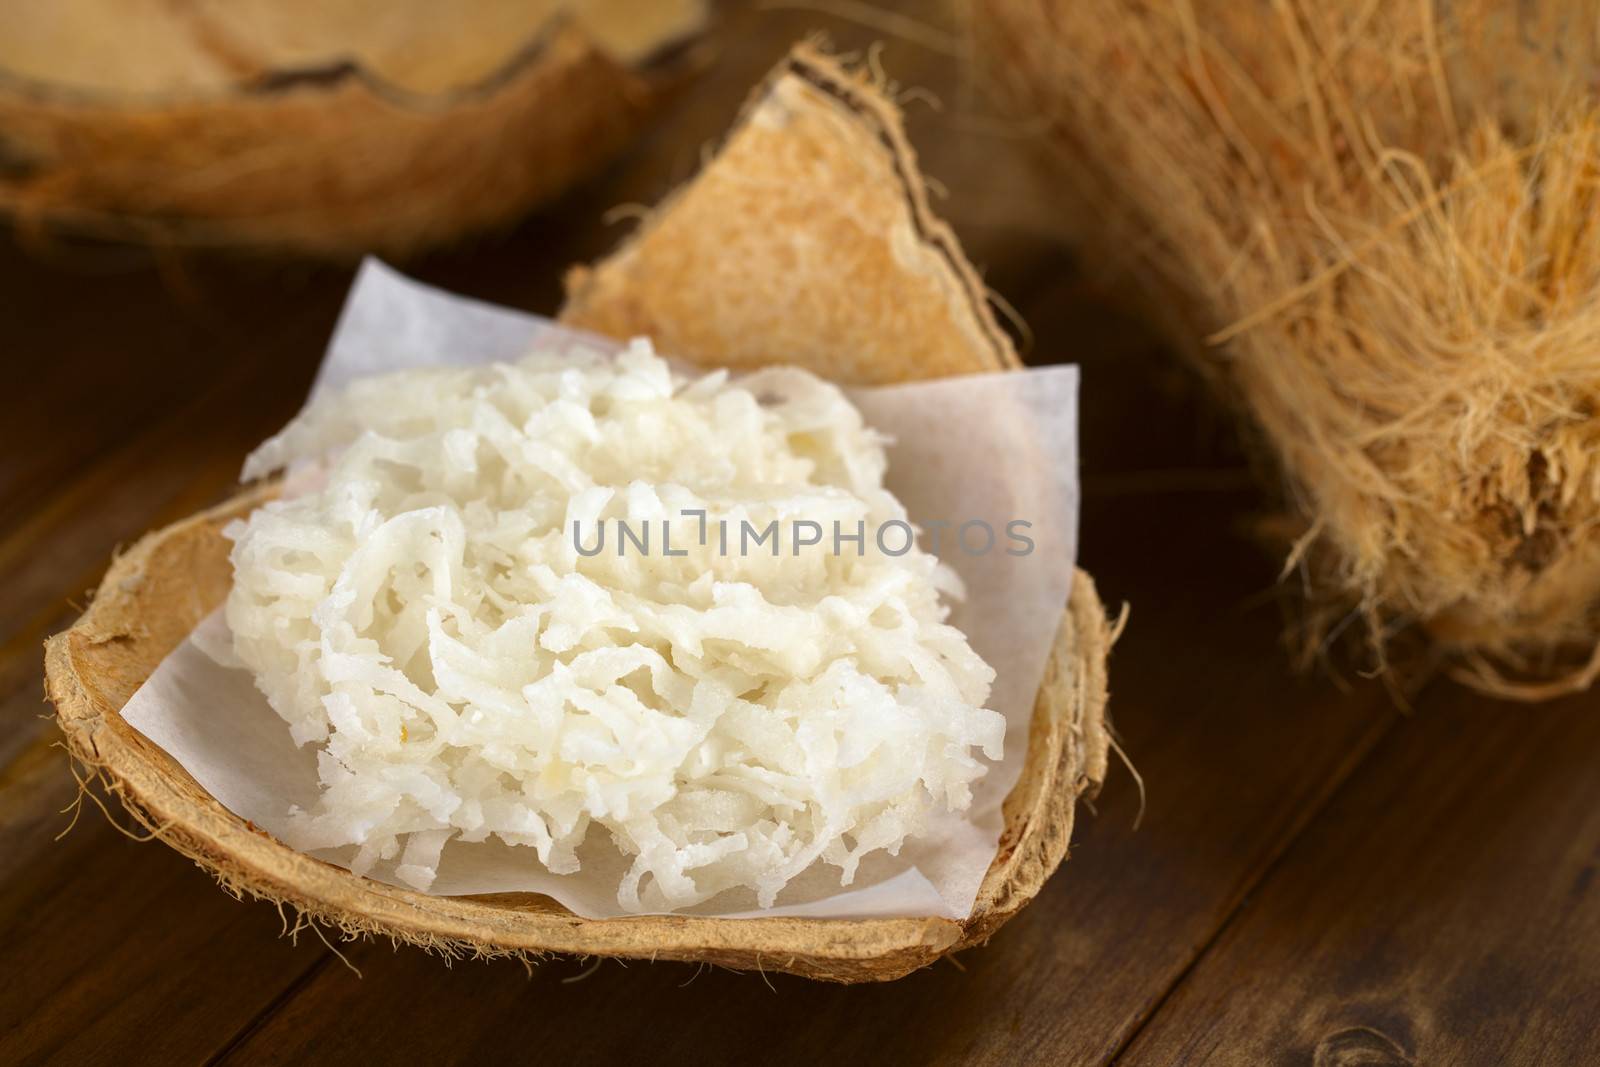 Peruvian cocada, a traditional coconut dessert sold usually on the streets, made of grated coconut and granulated white sugar (Selective Focus, Focus one third ino the cocada)